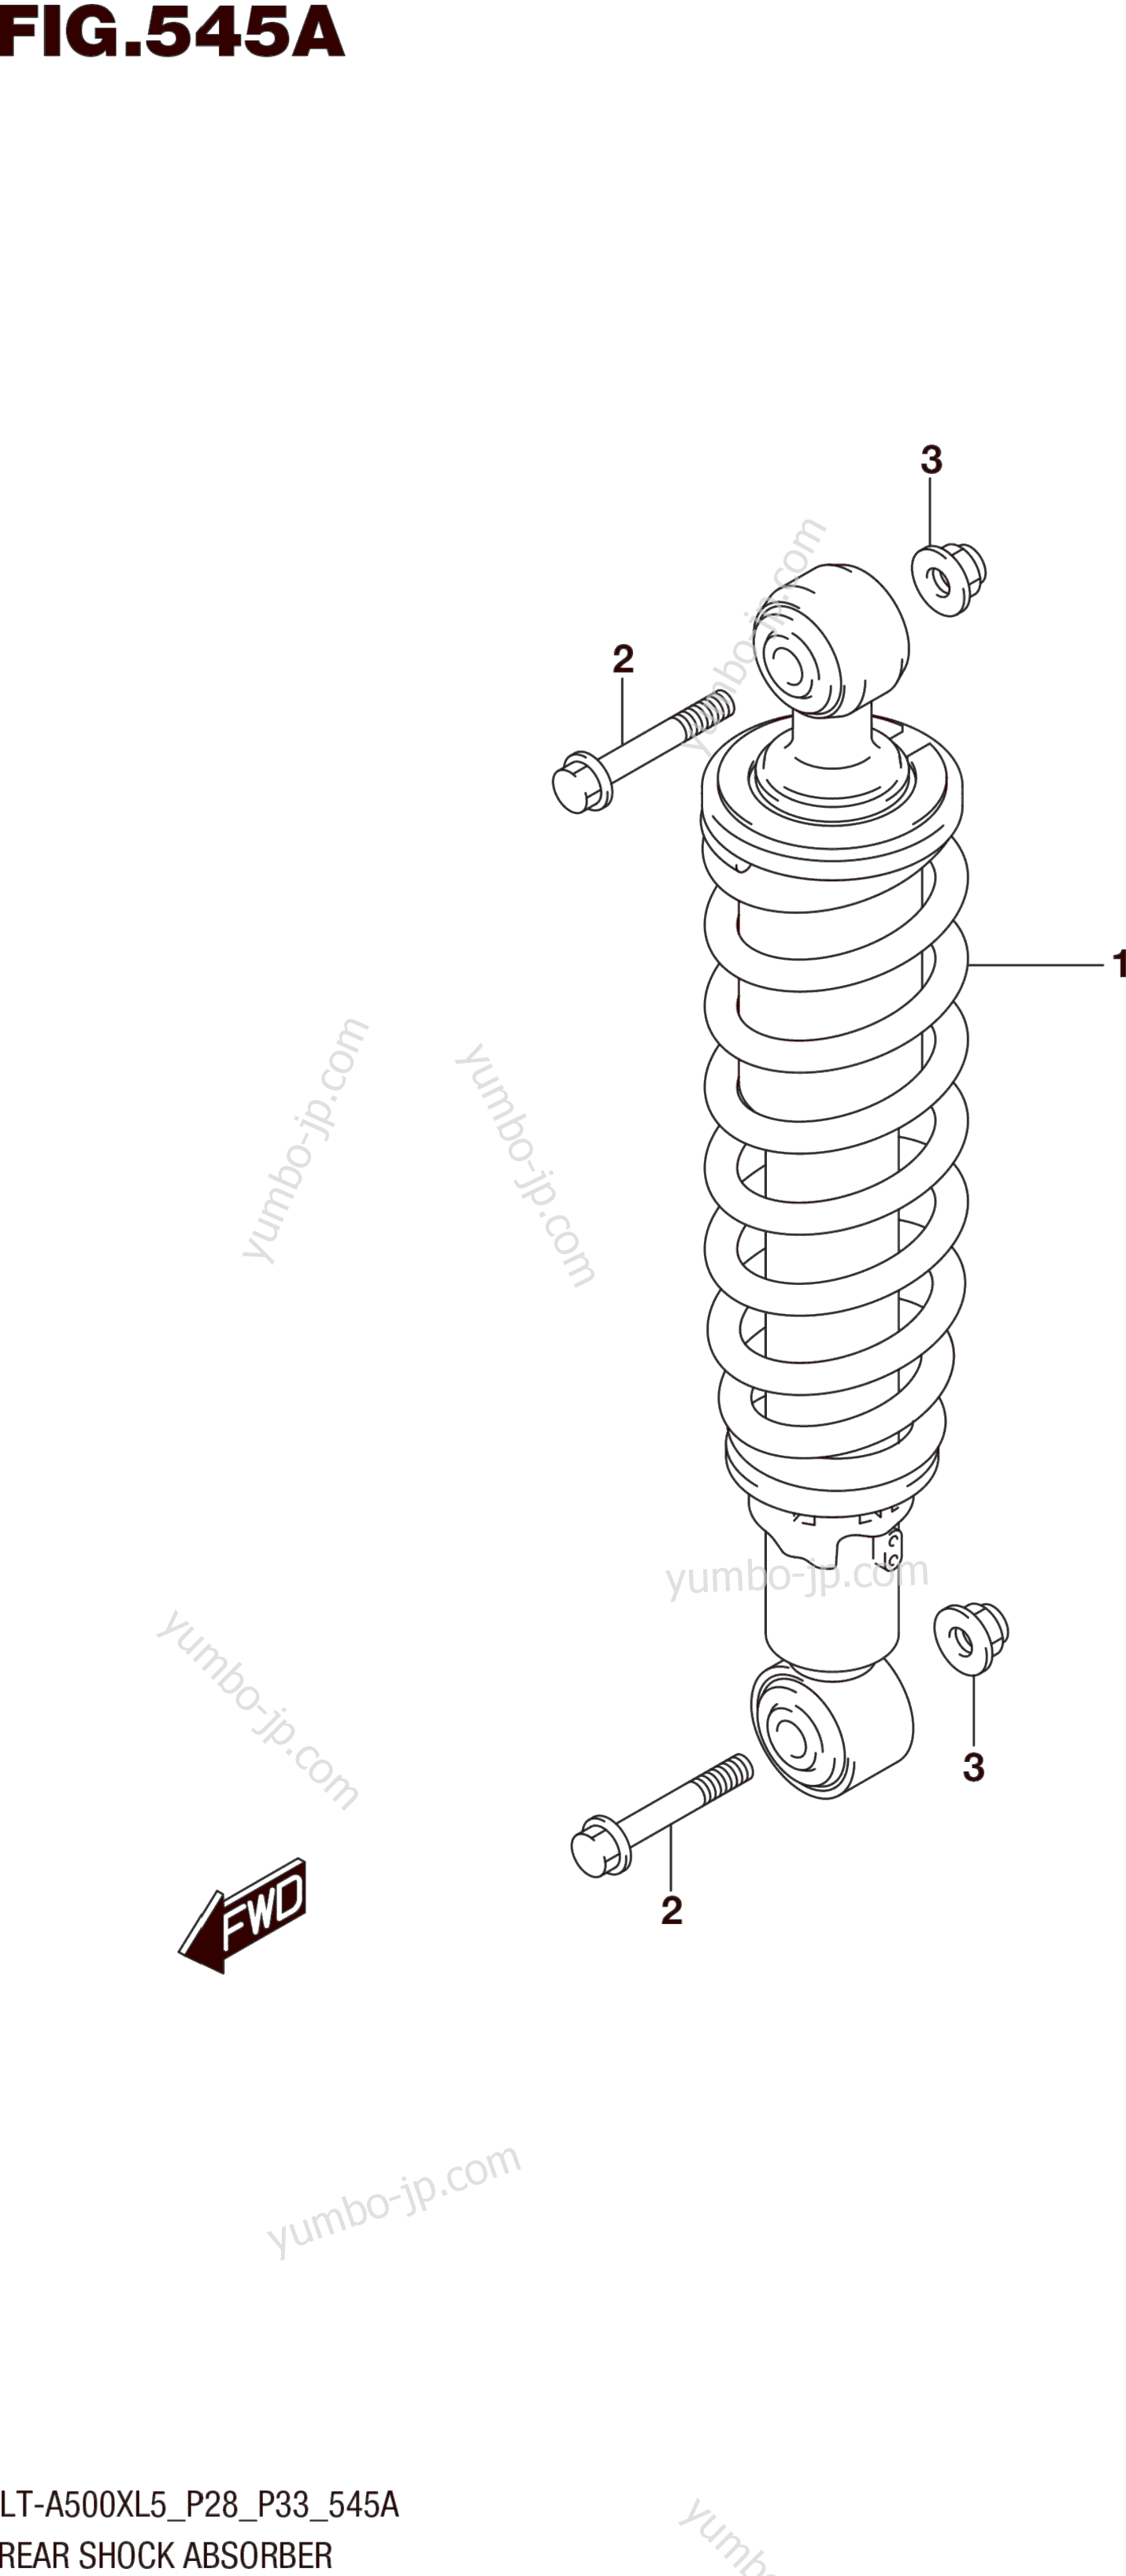 REAR SHOCK ABSORBER for ATVs SUZUKI LT-A500X 2015 year